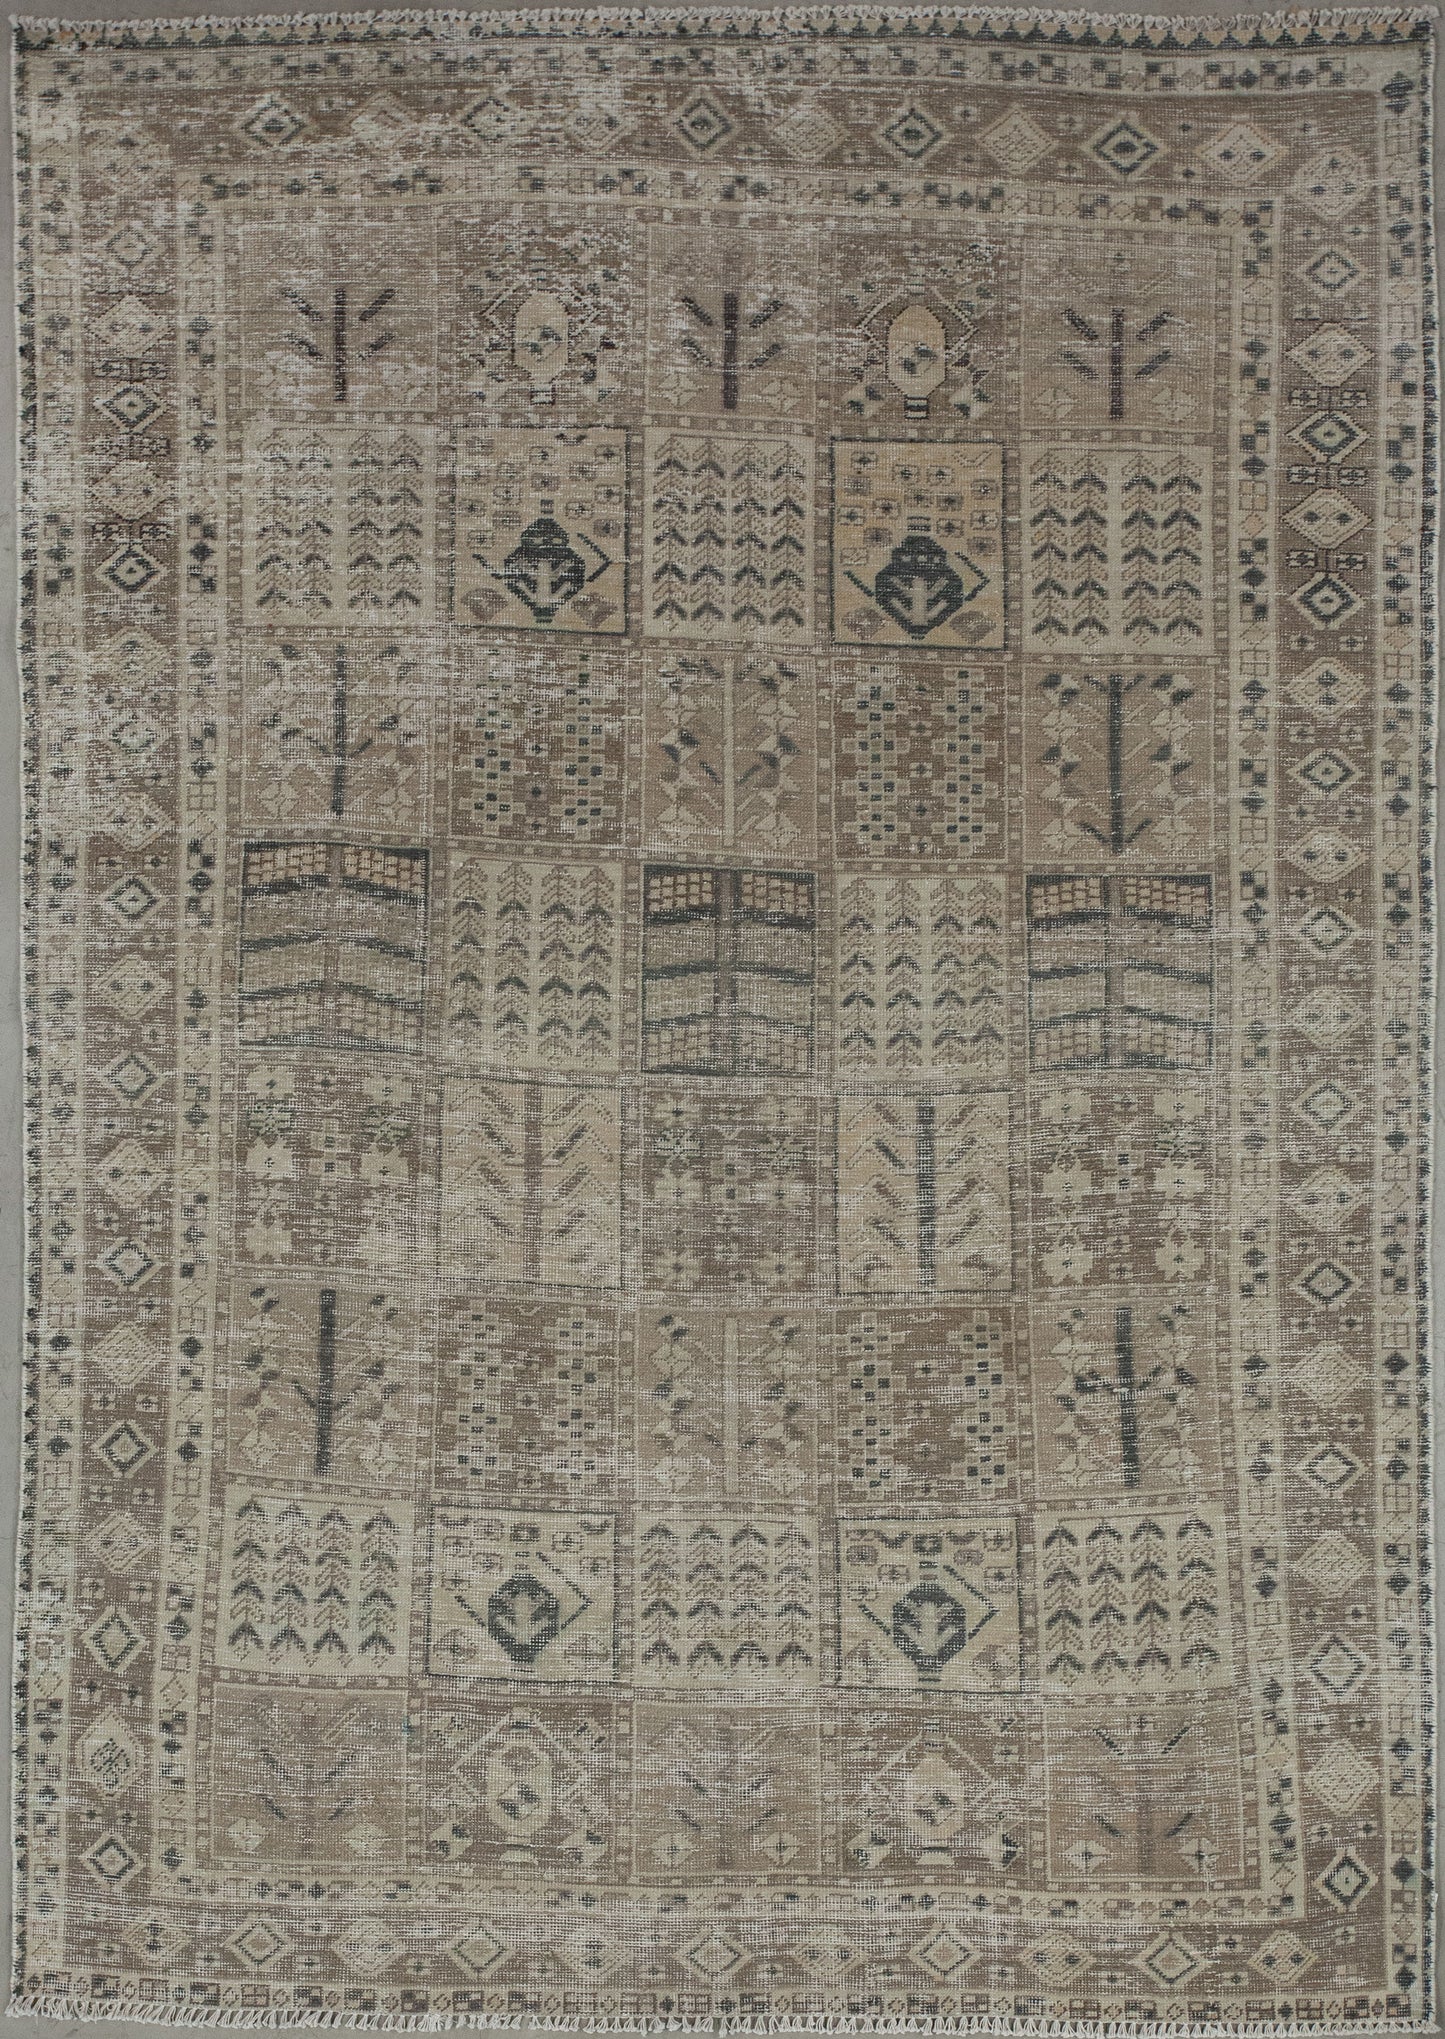 Impressive rug comes in a vintage style.